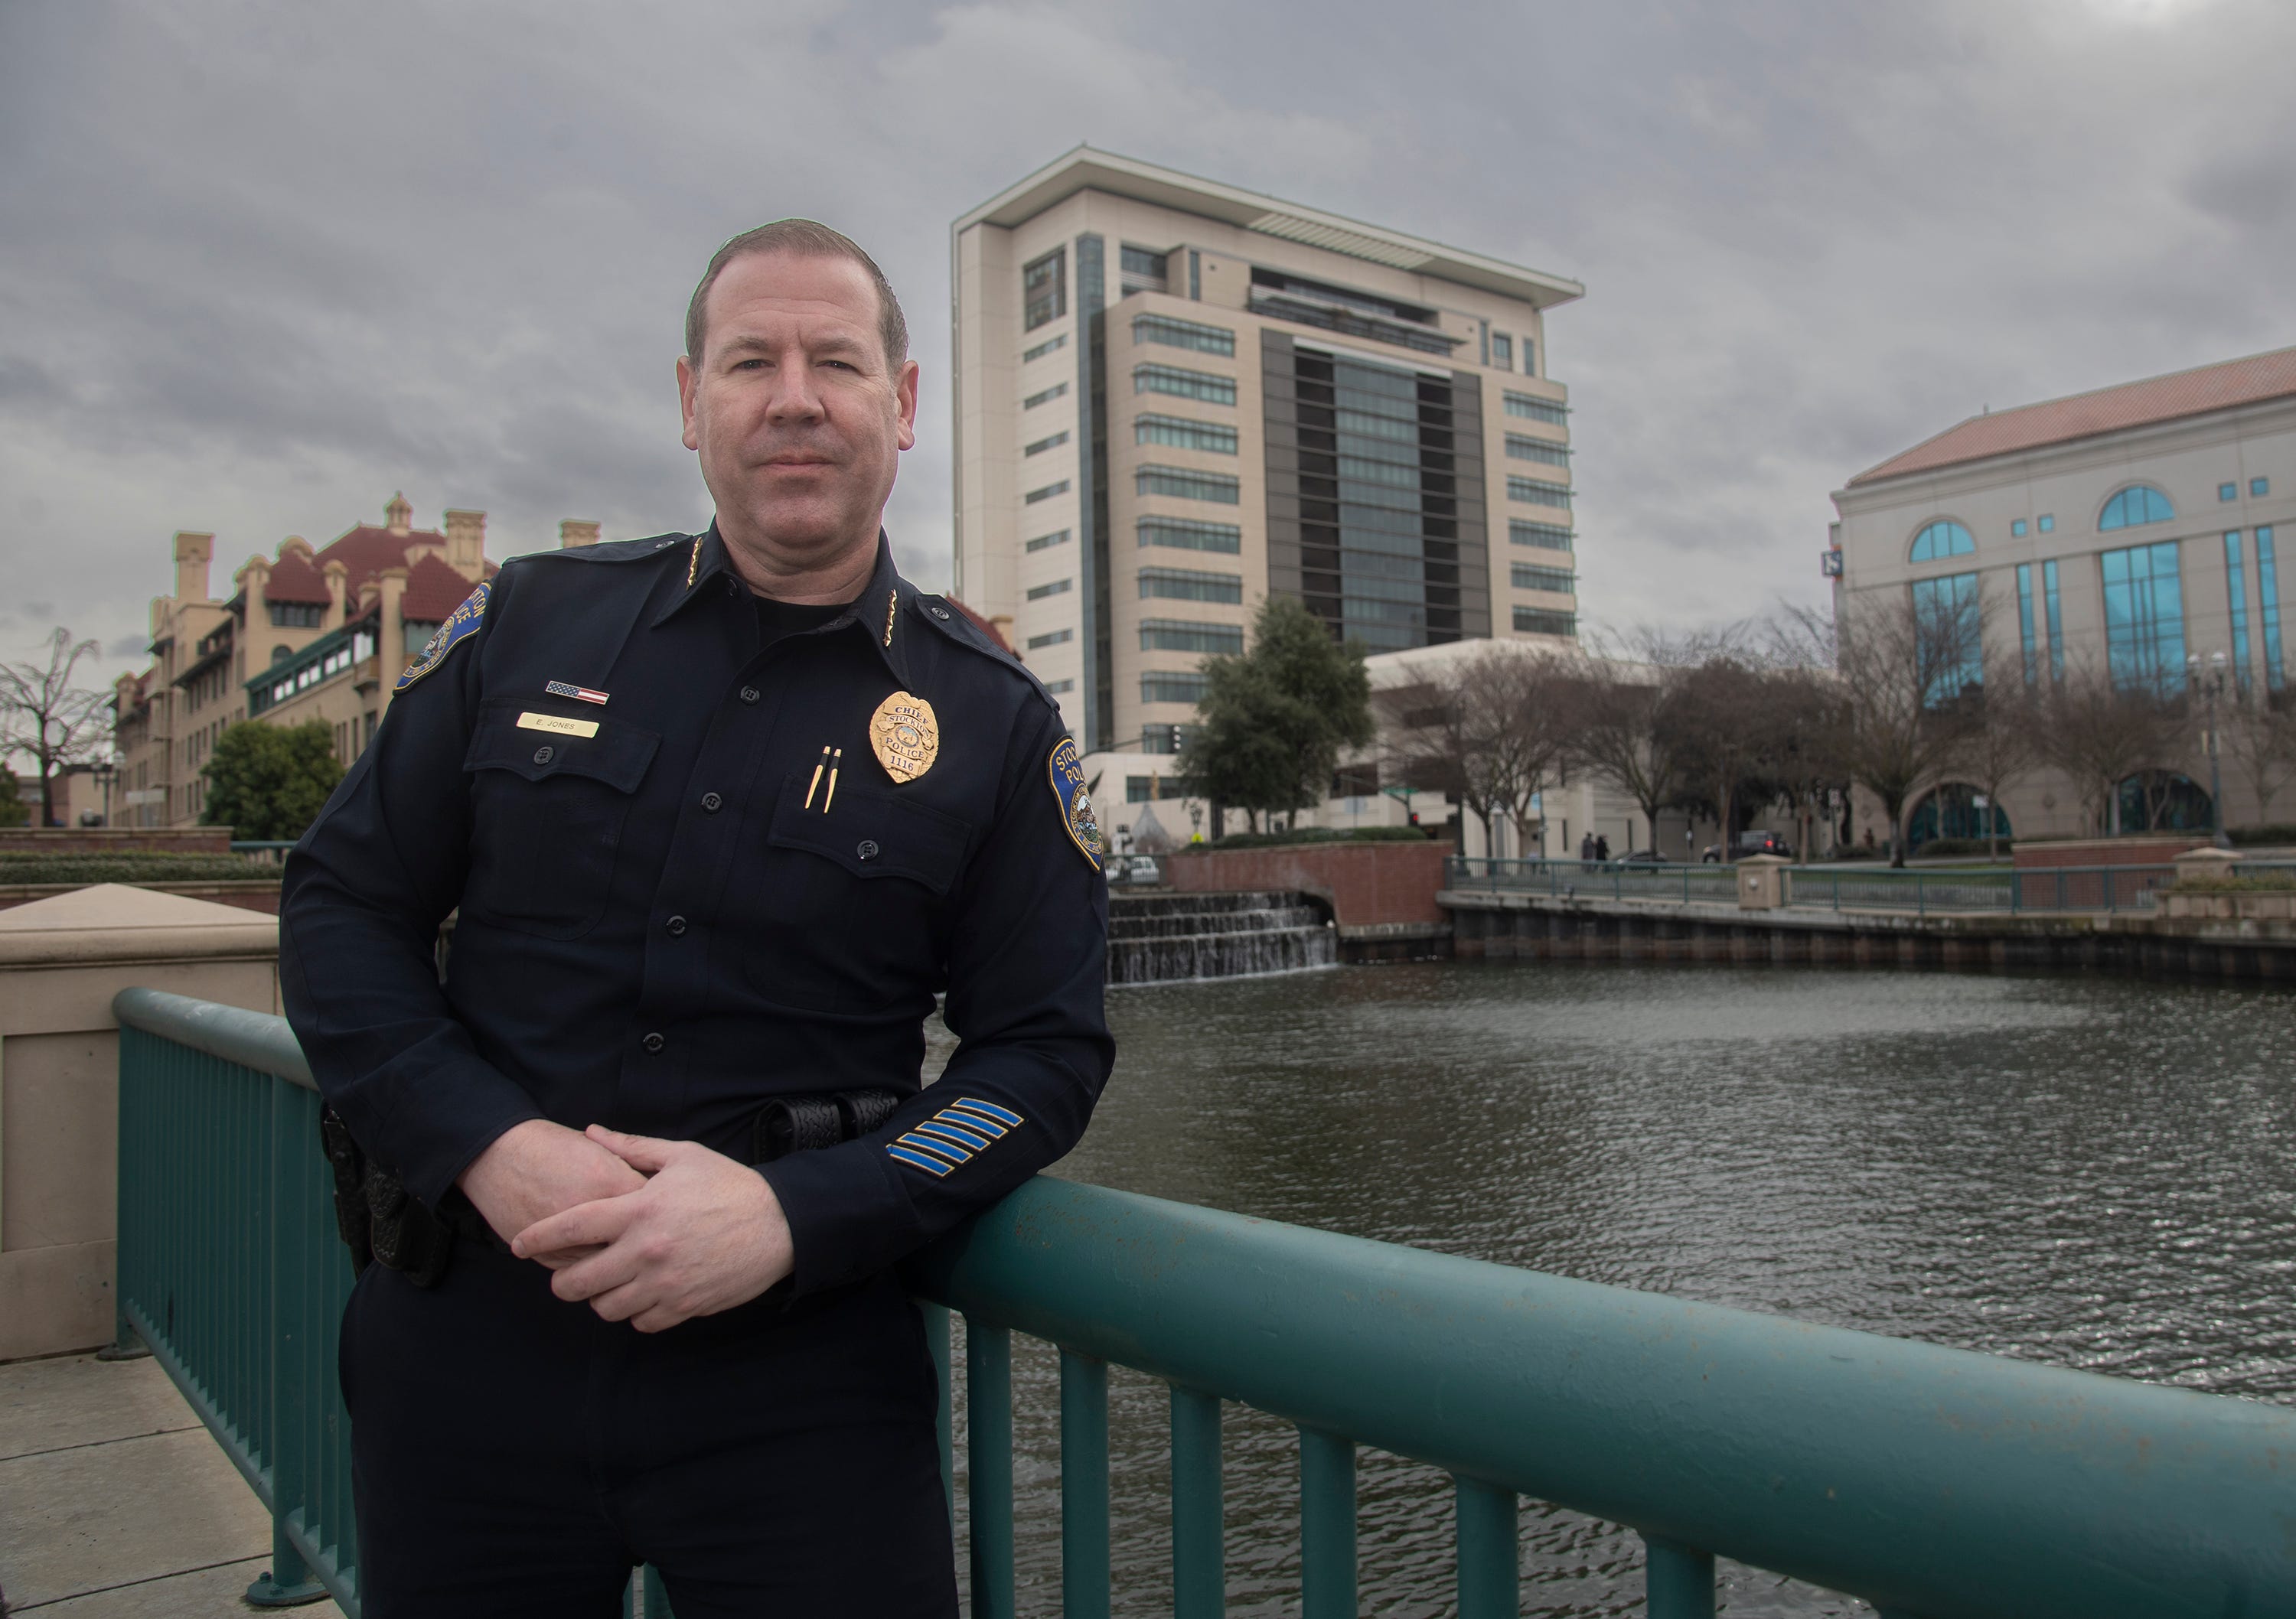 Stockton Police Chief Eric Jones has spoken about the racist history of American law enforcement, something he says the department is tackling head-on.